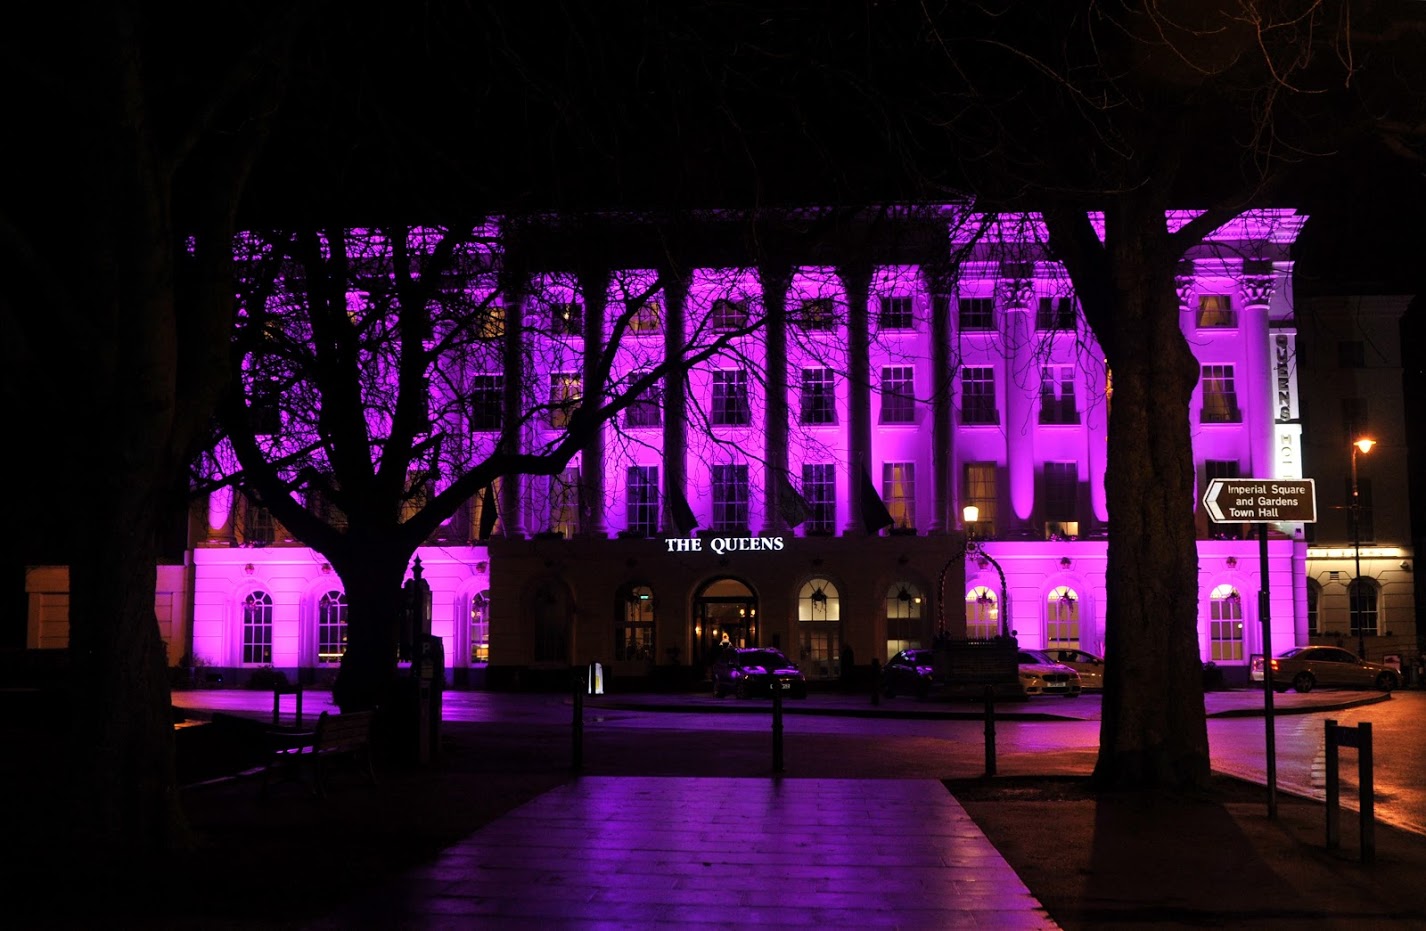 Queens Hotel lit up in purple through branches of a tree